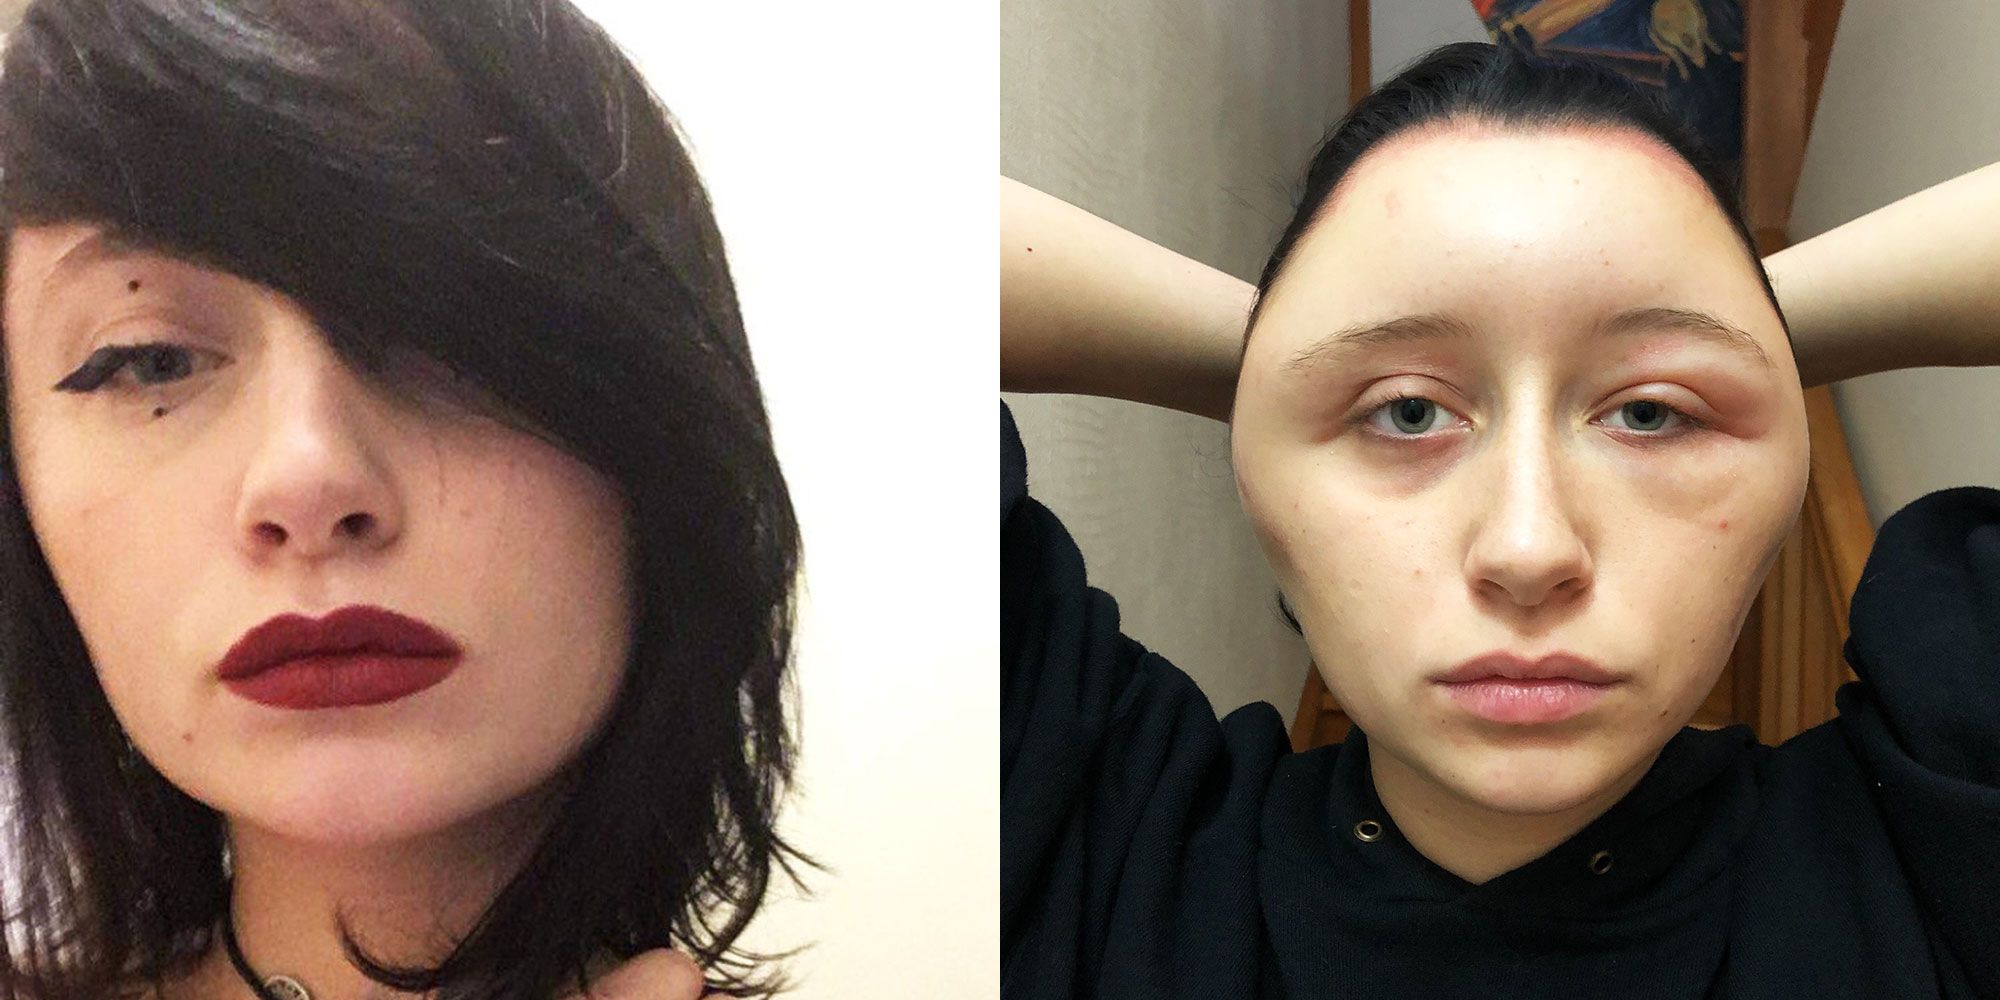 Woman Had Severely Swollen Head After Allergic Reaction To Hair photo